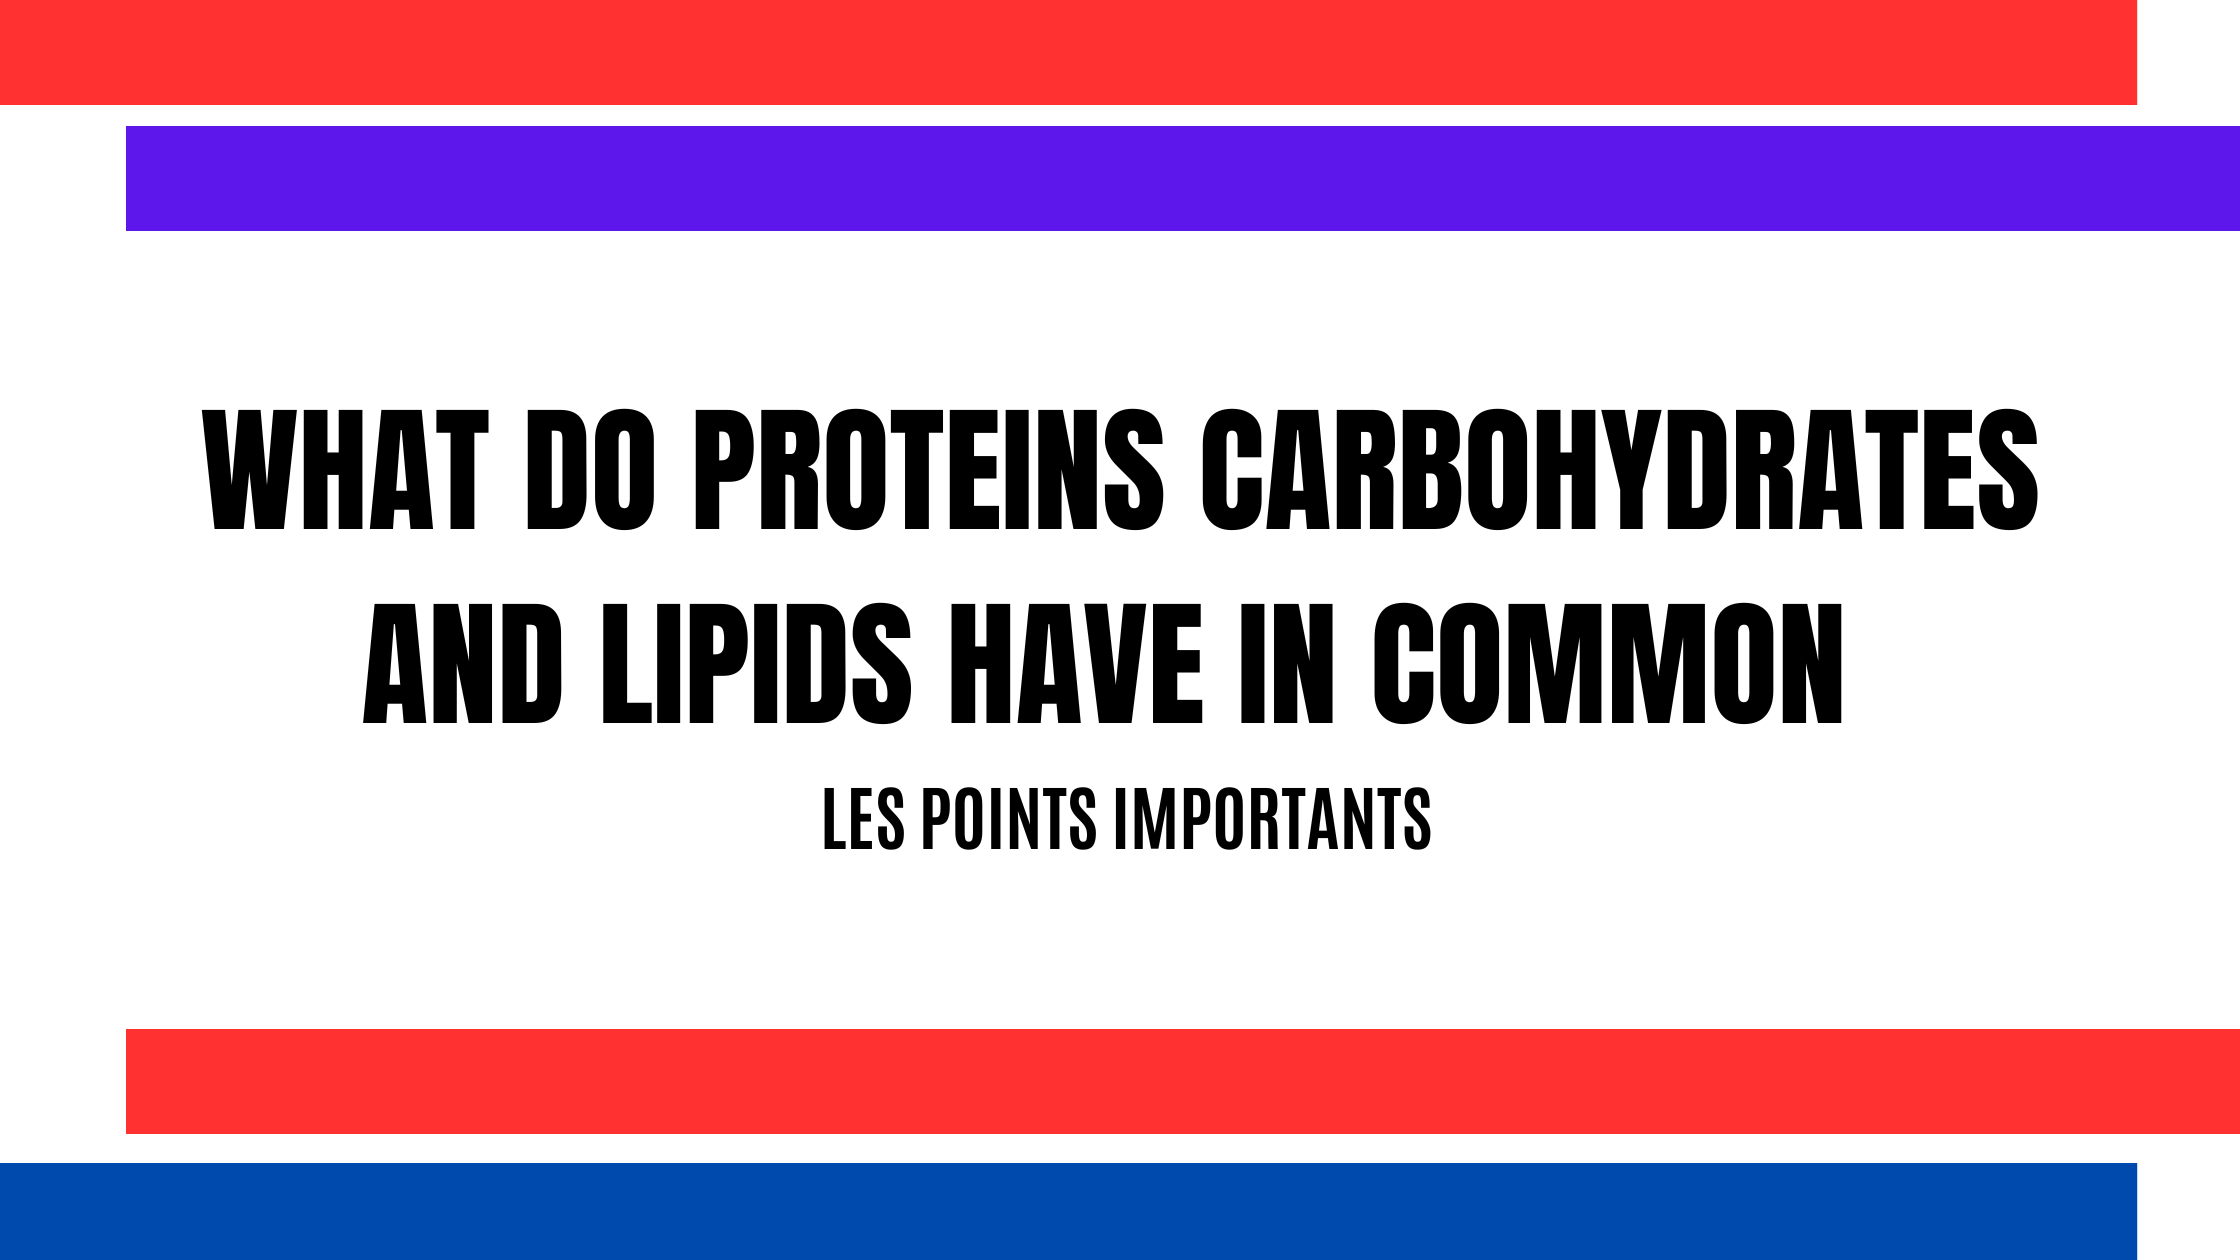 what do proteins carbohydrates and lipids have in common | Les points importants